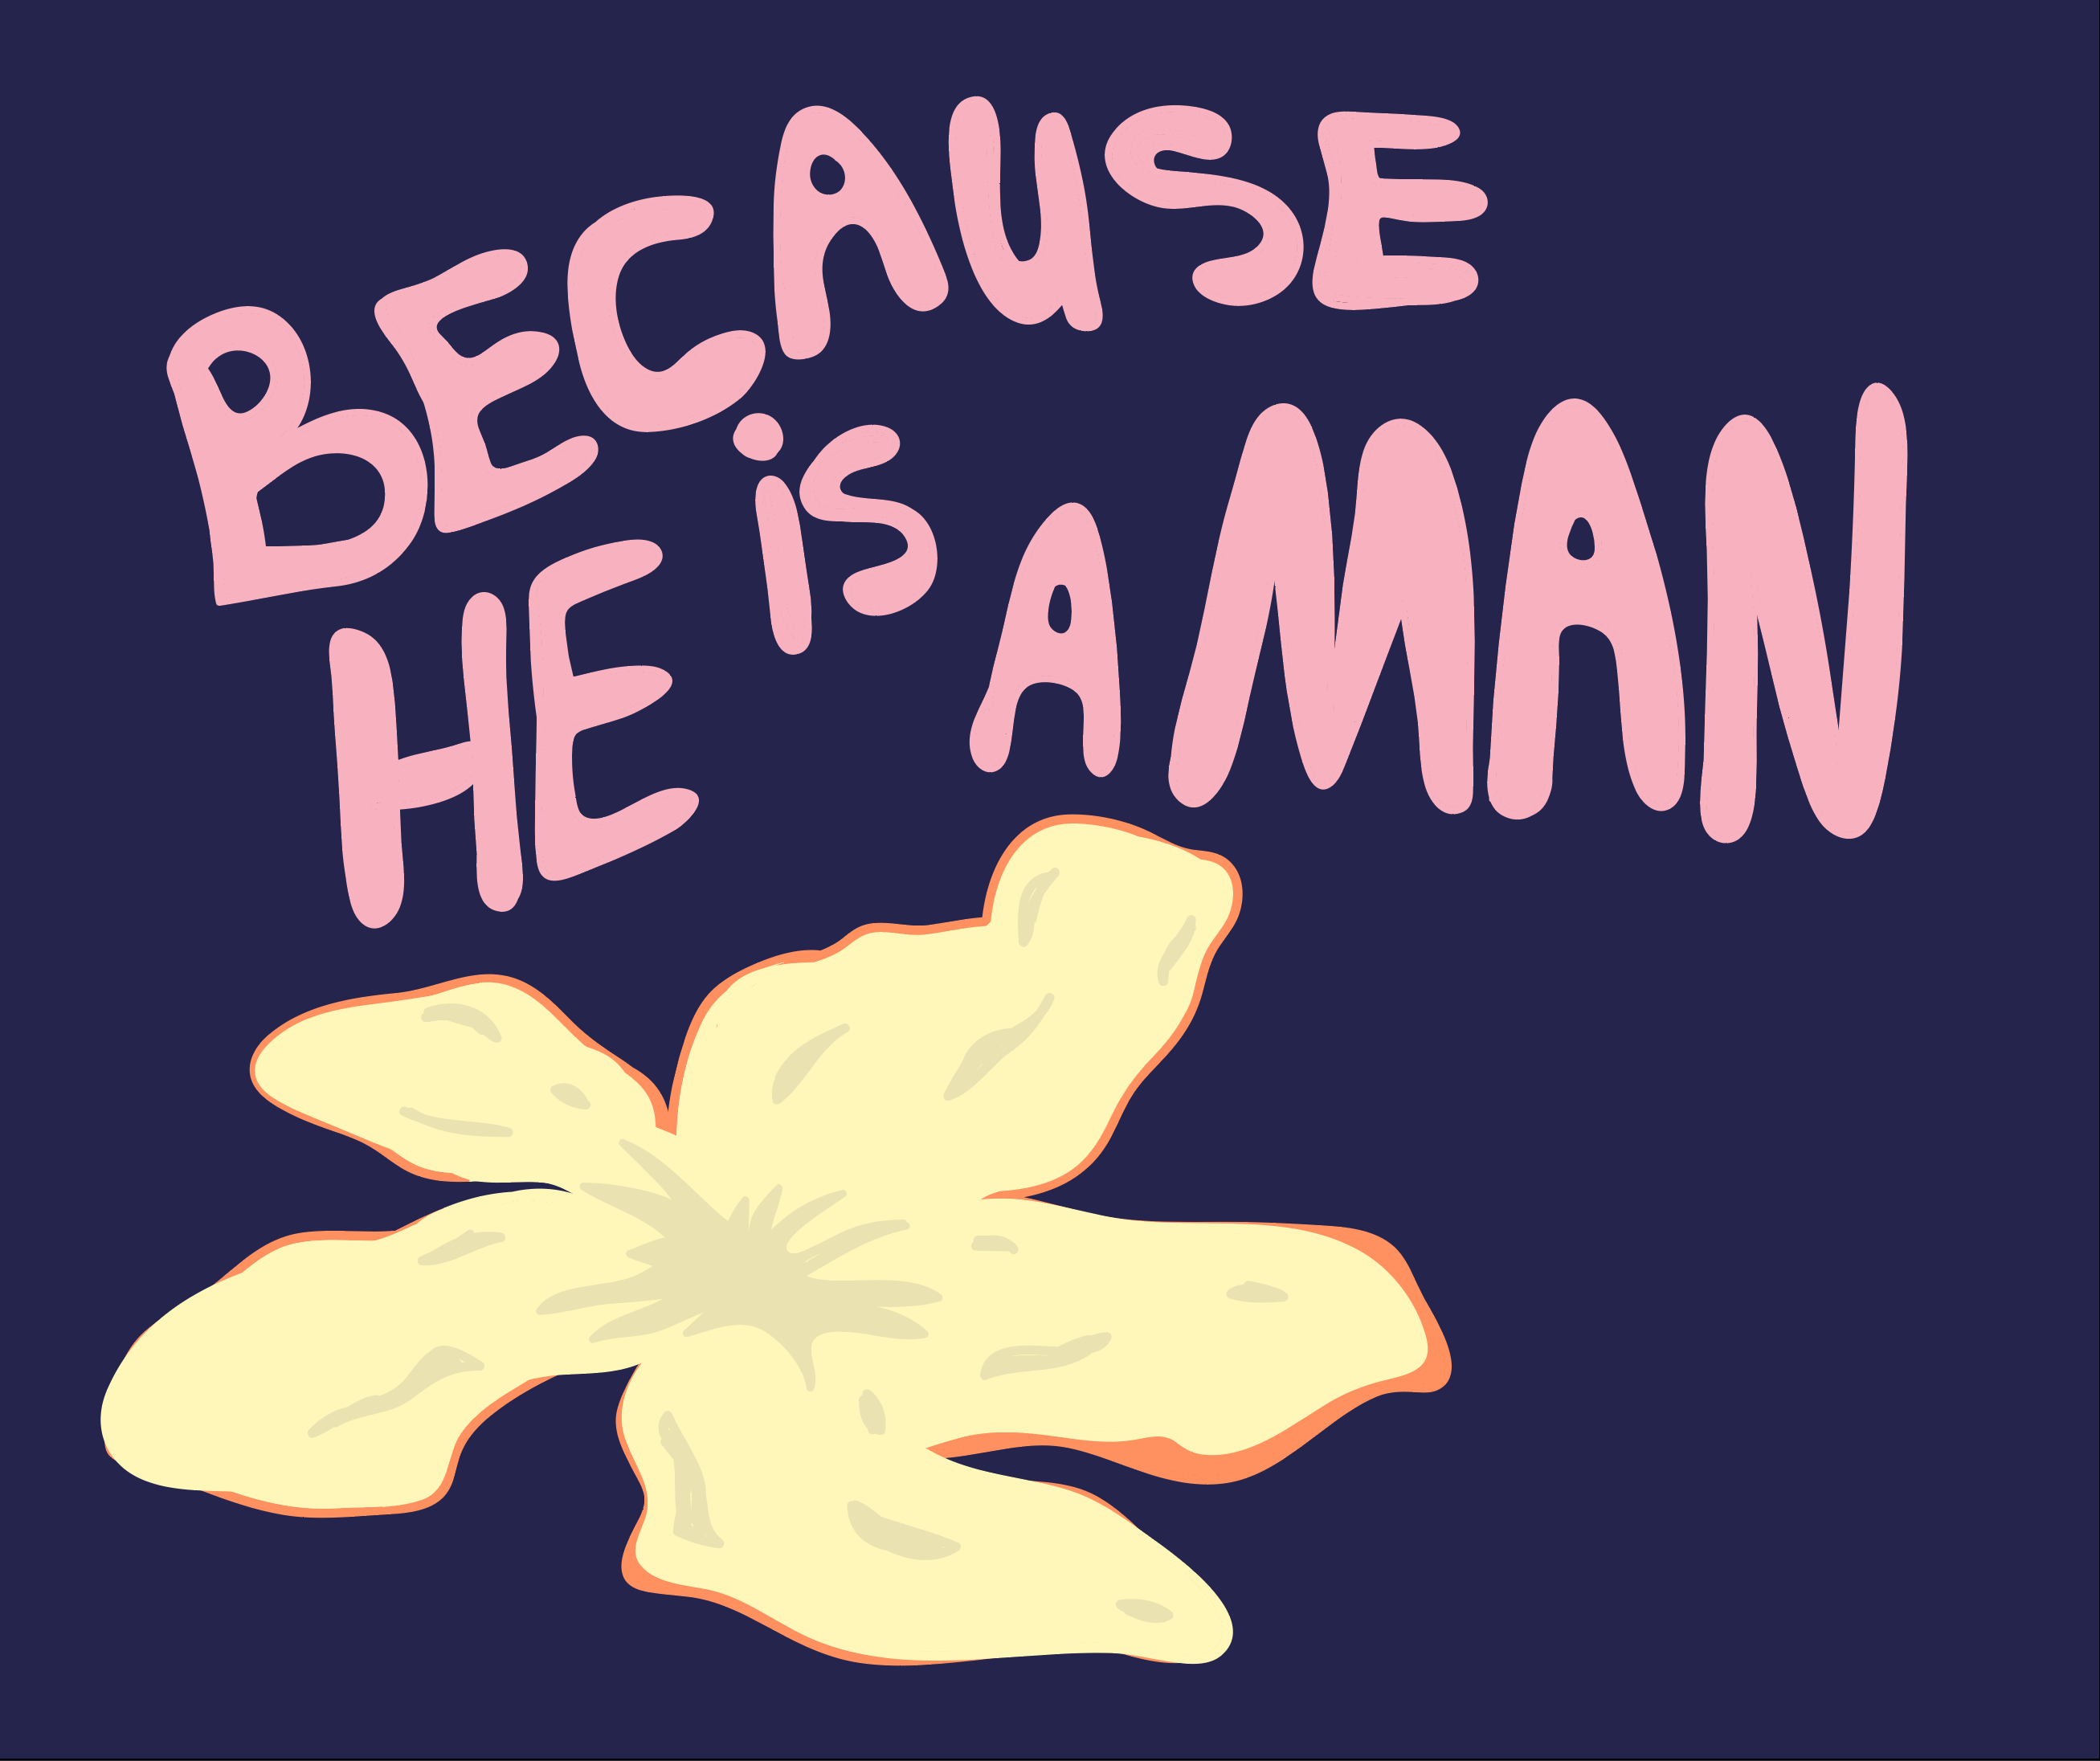 Because He is a Man